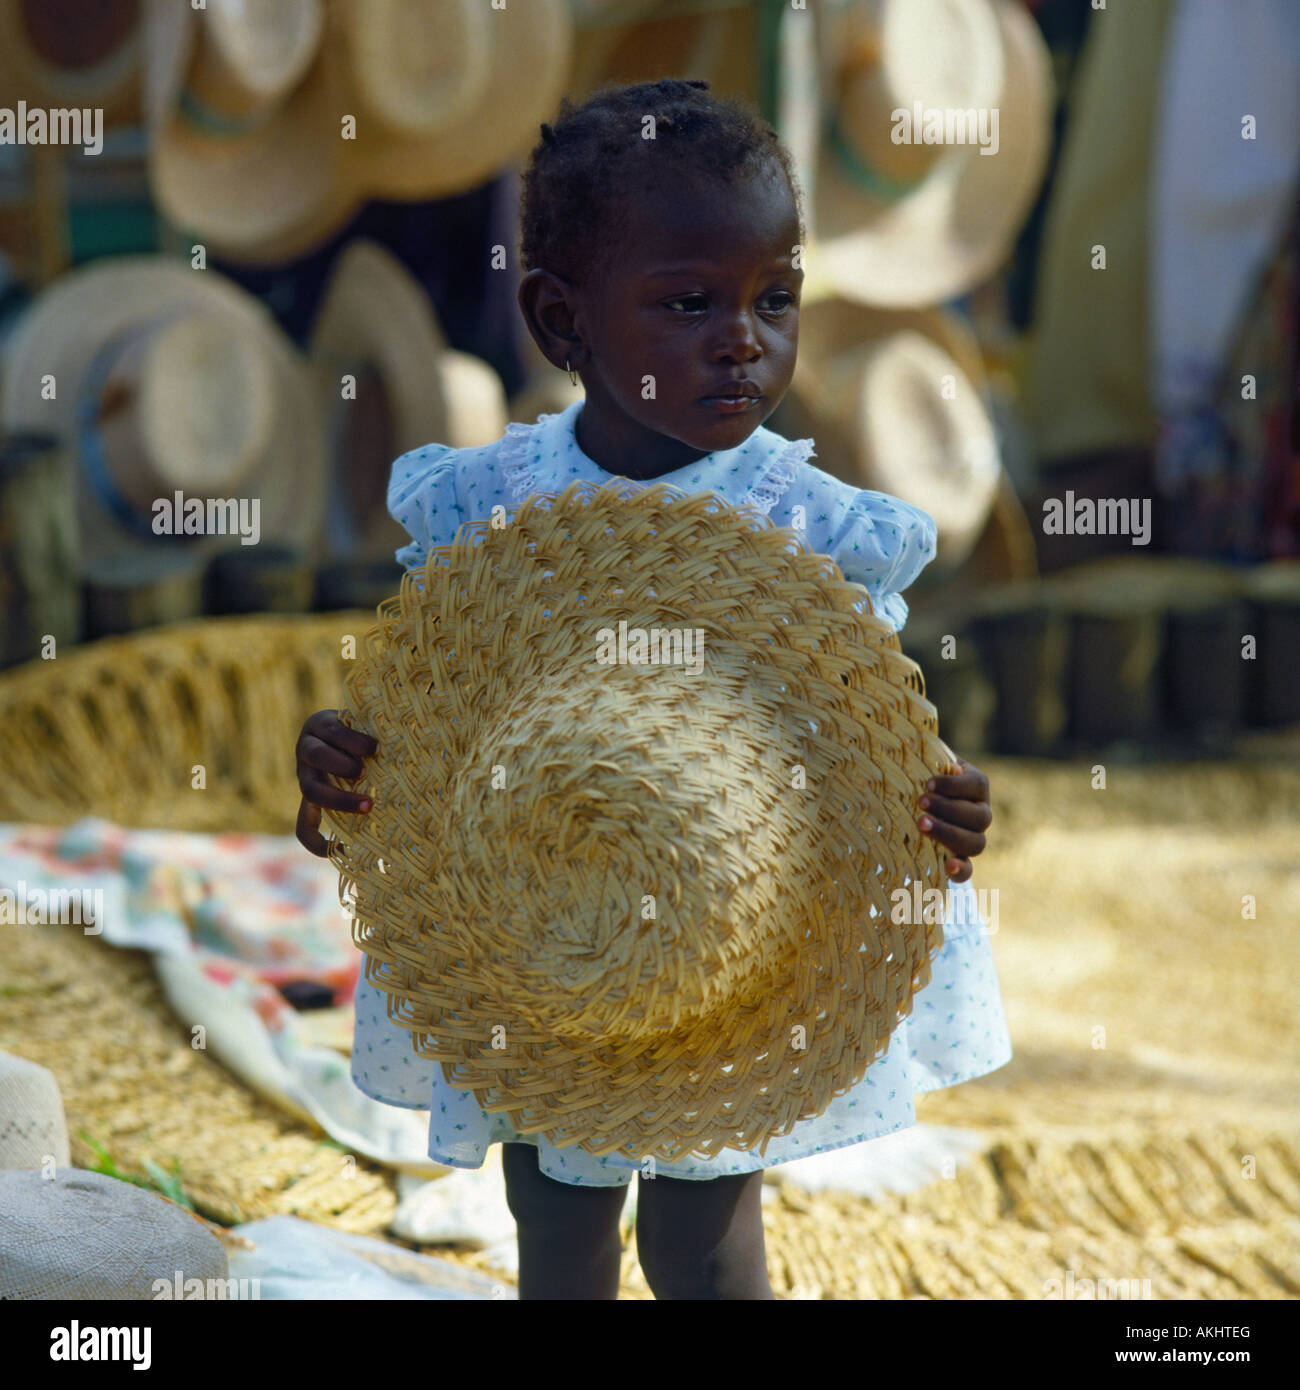 Little girl in pretty spotted dress shyly holding straw sunhat in front of her at a market stall Ocho Rios Jamaica The Caribbean Stock Photo